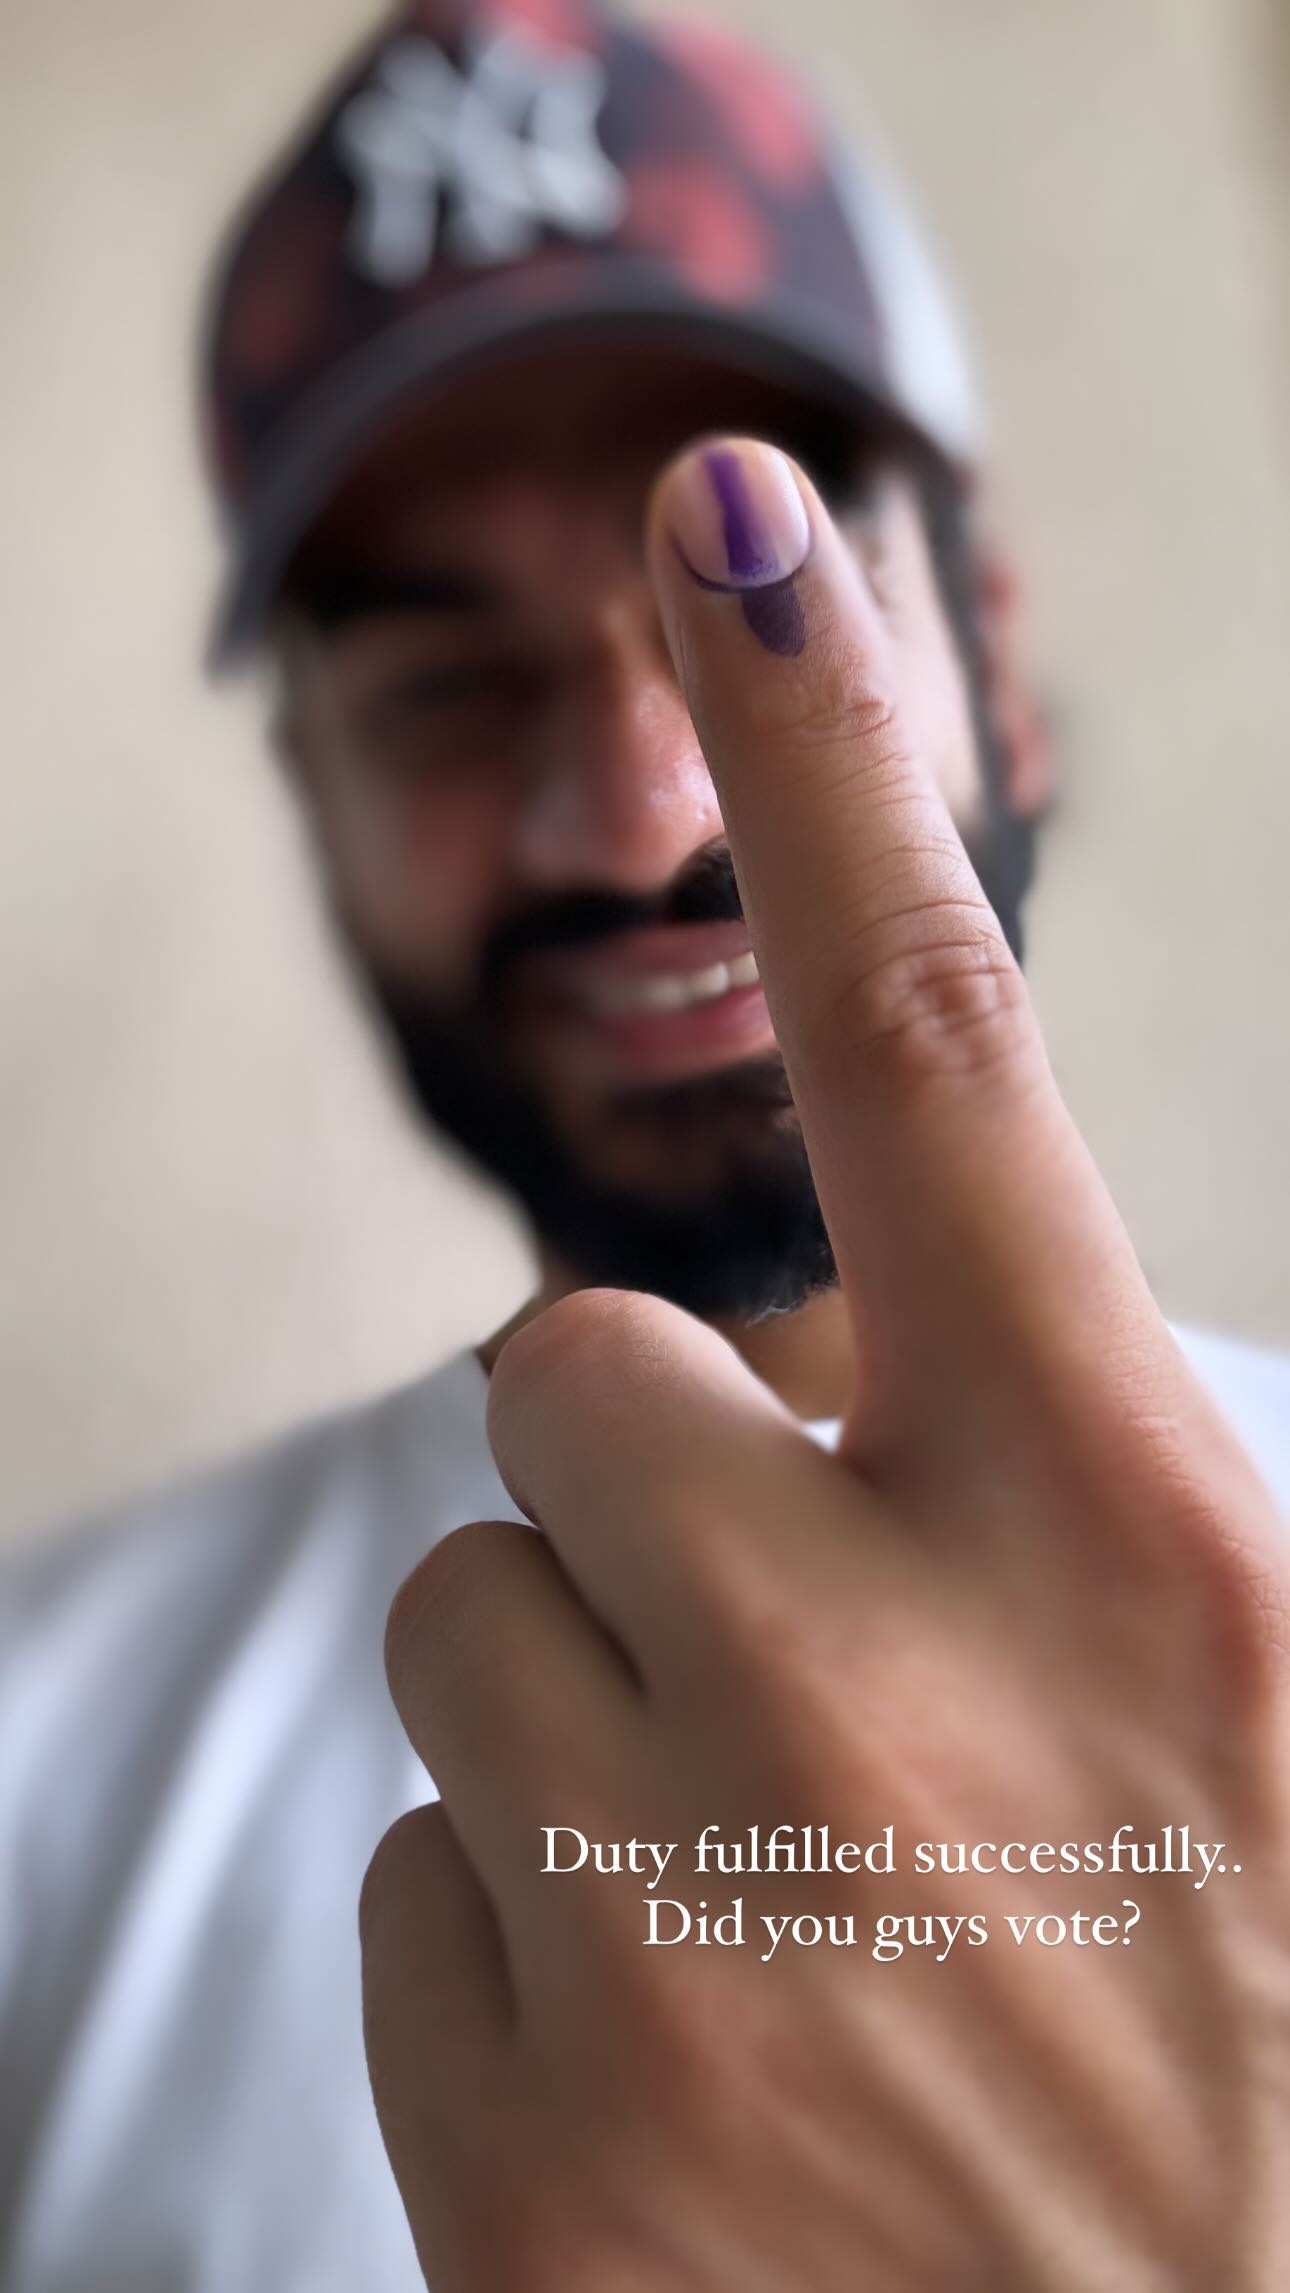 Sunny Kaushal shares a selfie with his inked finger